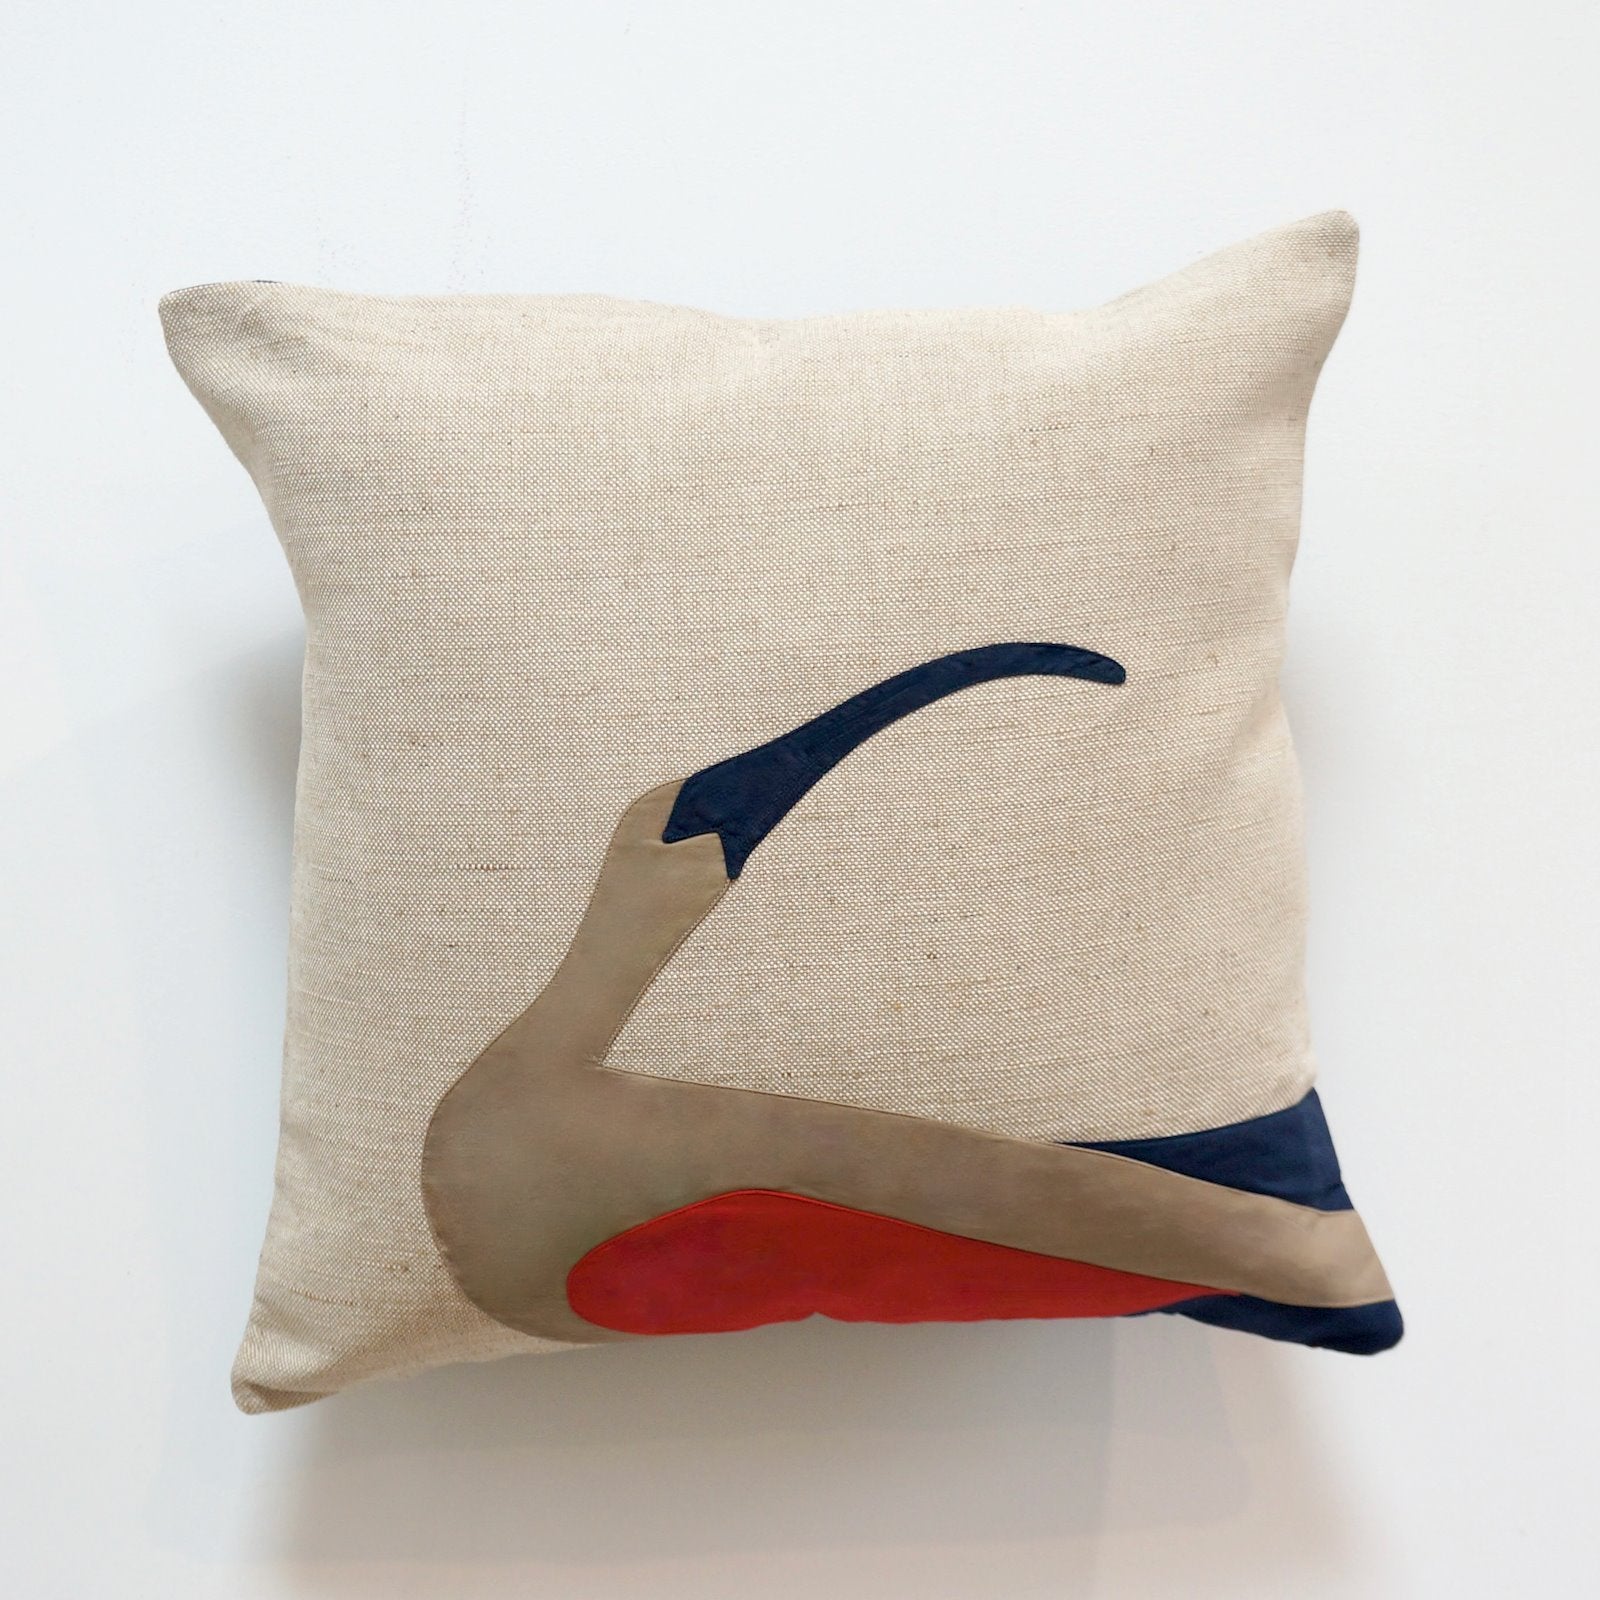 Ibis Cushion in Red and Navy Blue WEFTshop 